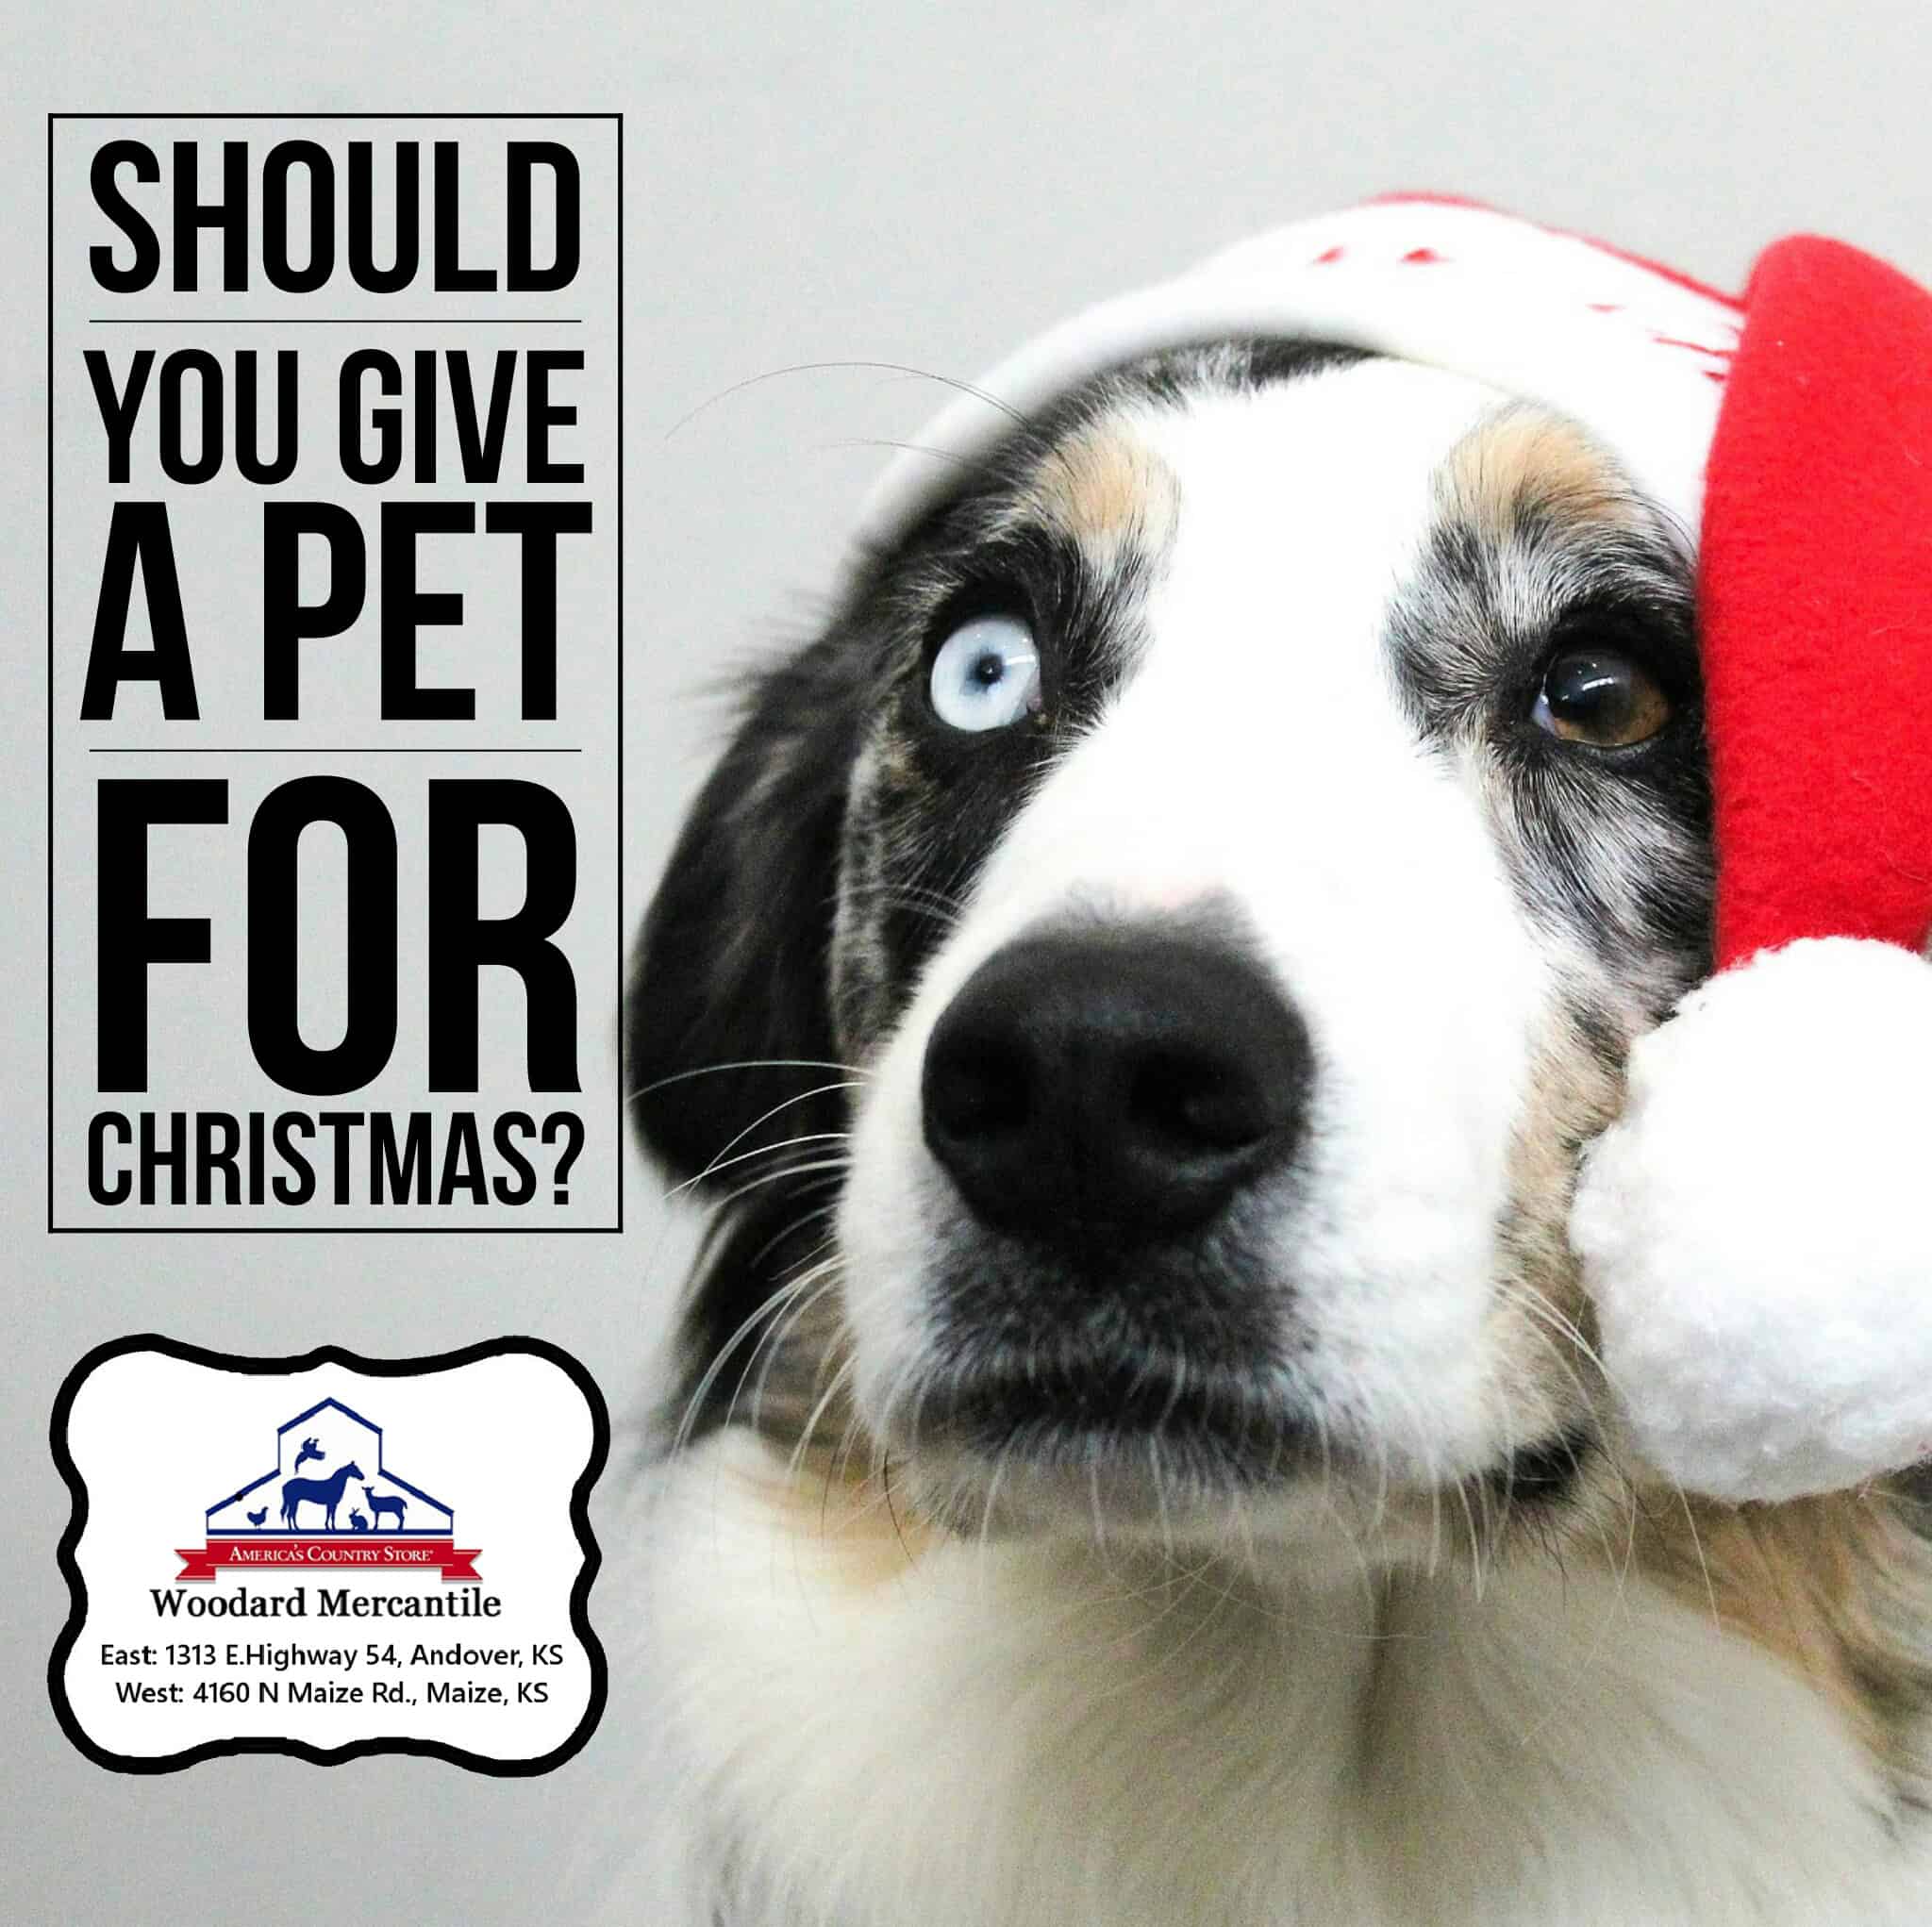 Should You Give A Pet For Christmas